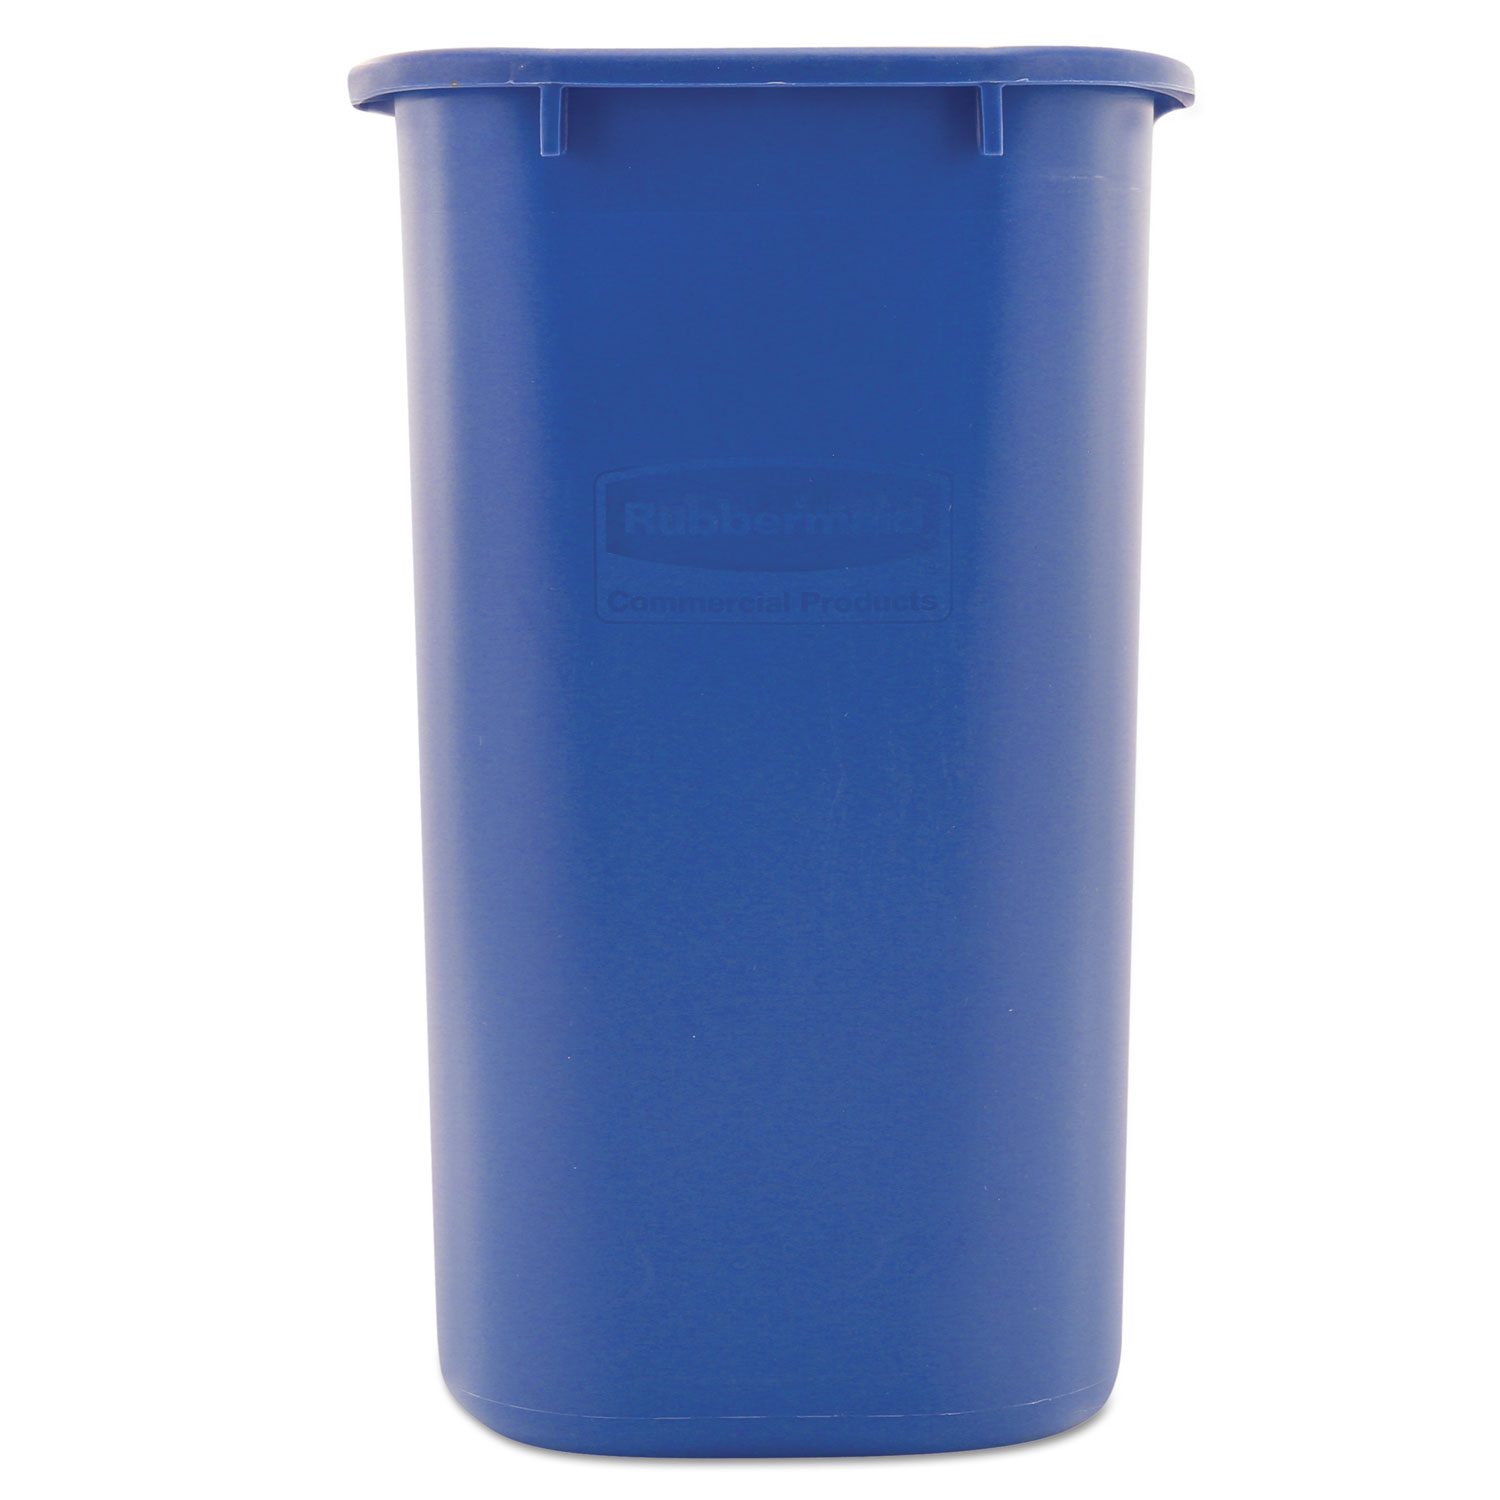 Rubbermaid Deskside Recycling Container, Blue